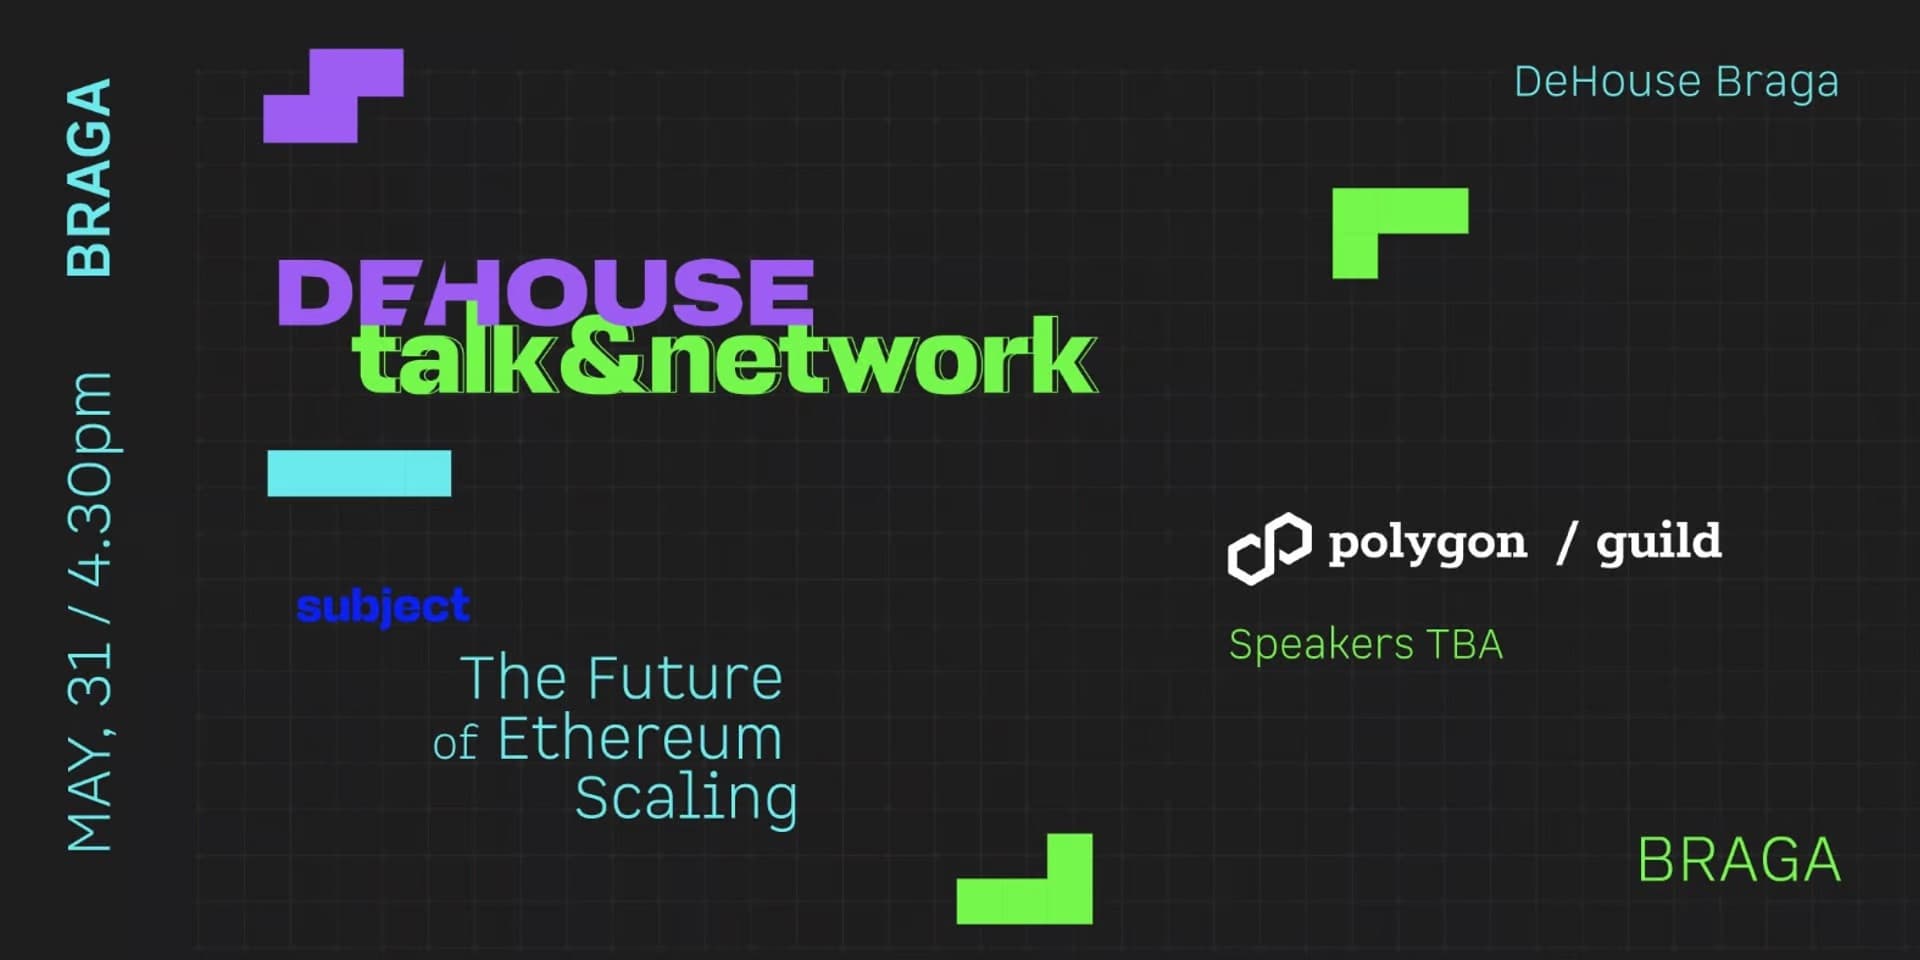 The Future of Ethereum Scaling